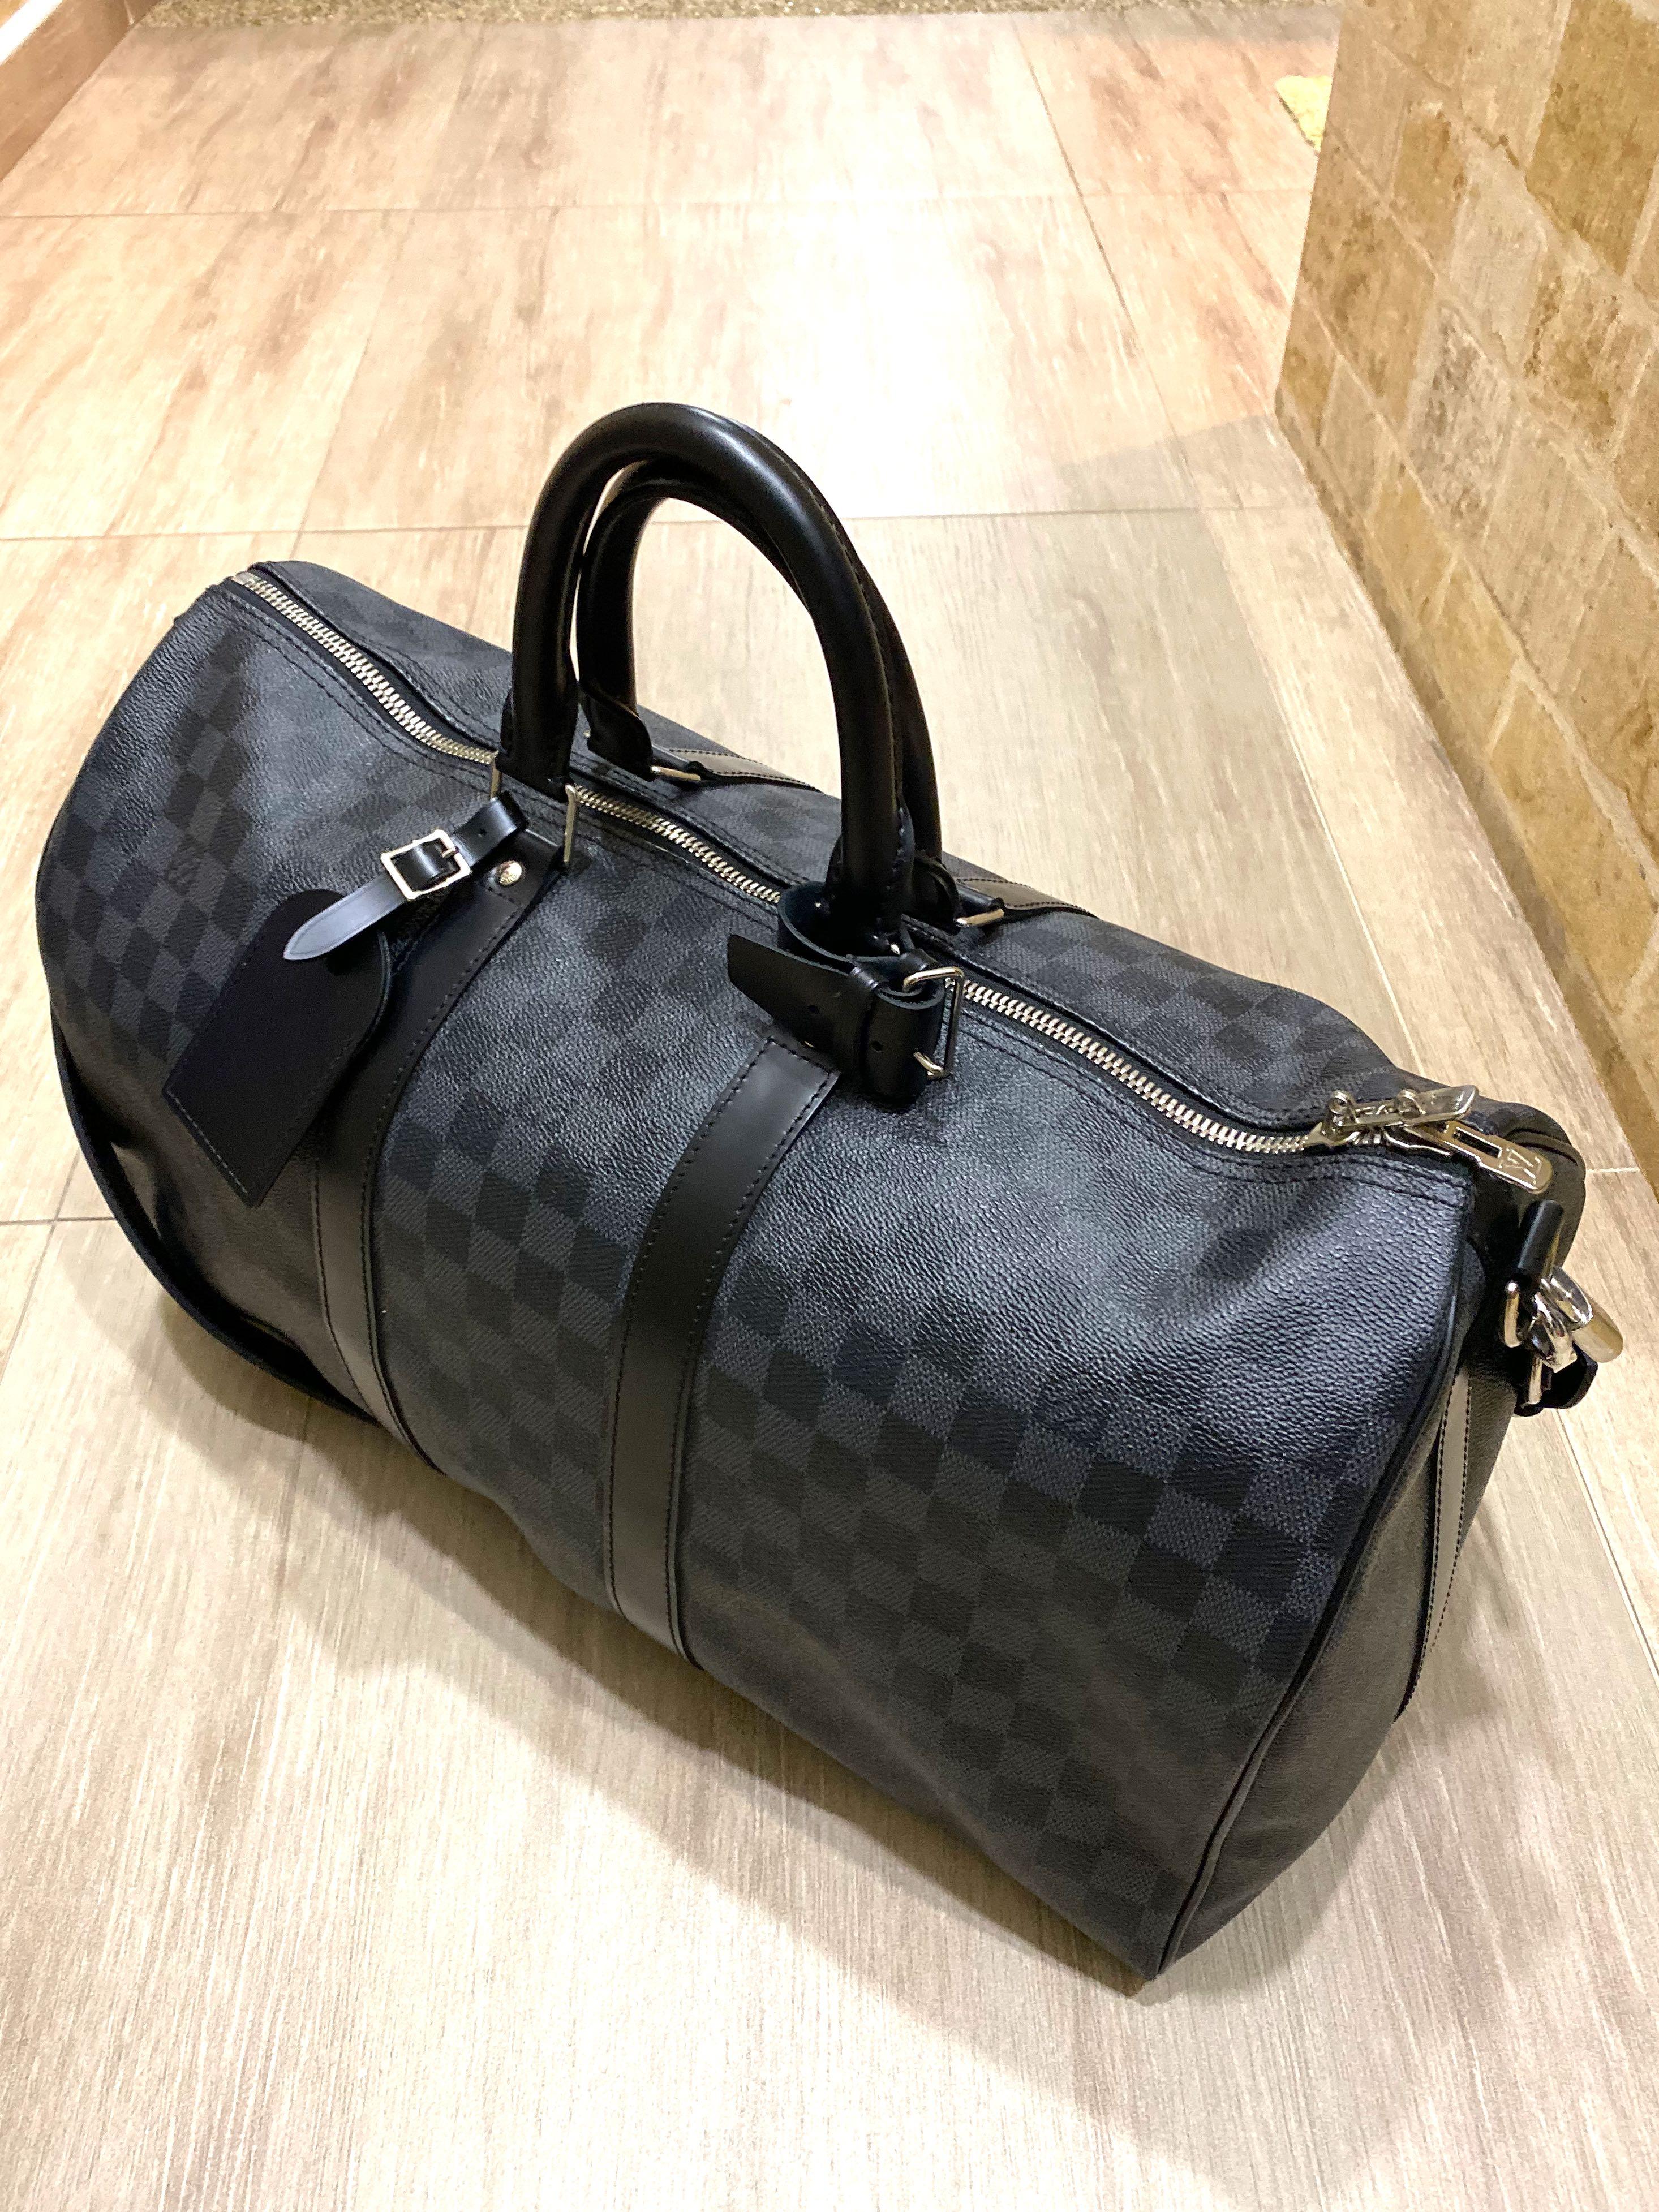 Sold at Auction: A designer duffle bag marked Louis Vuitton with dust bag,  strap & luggage tag